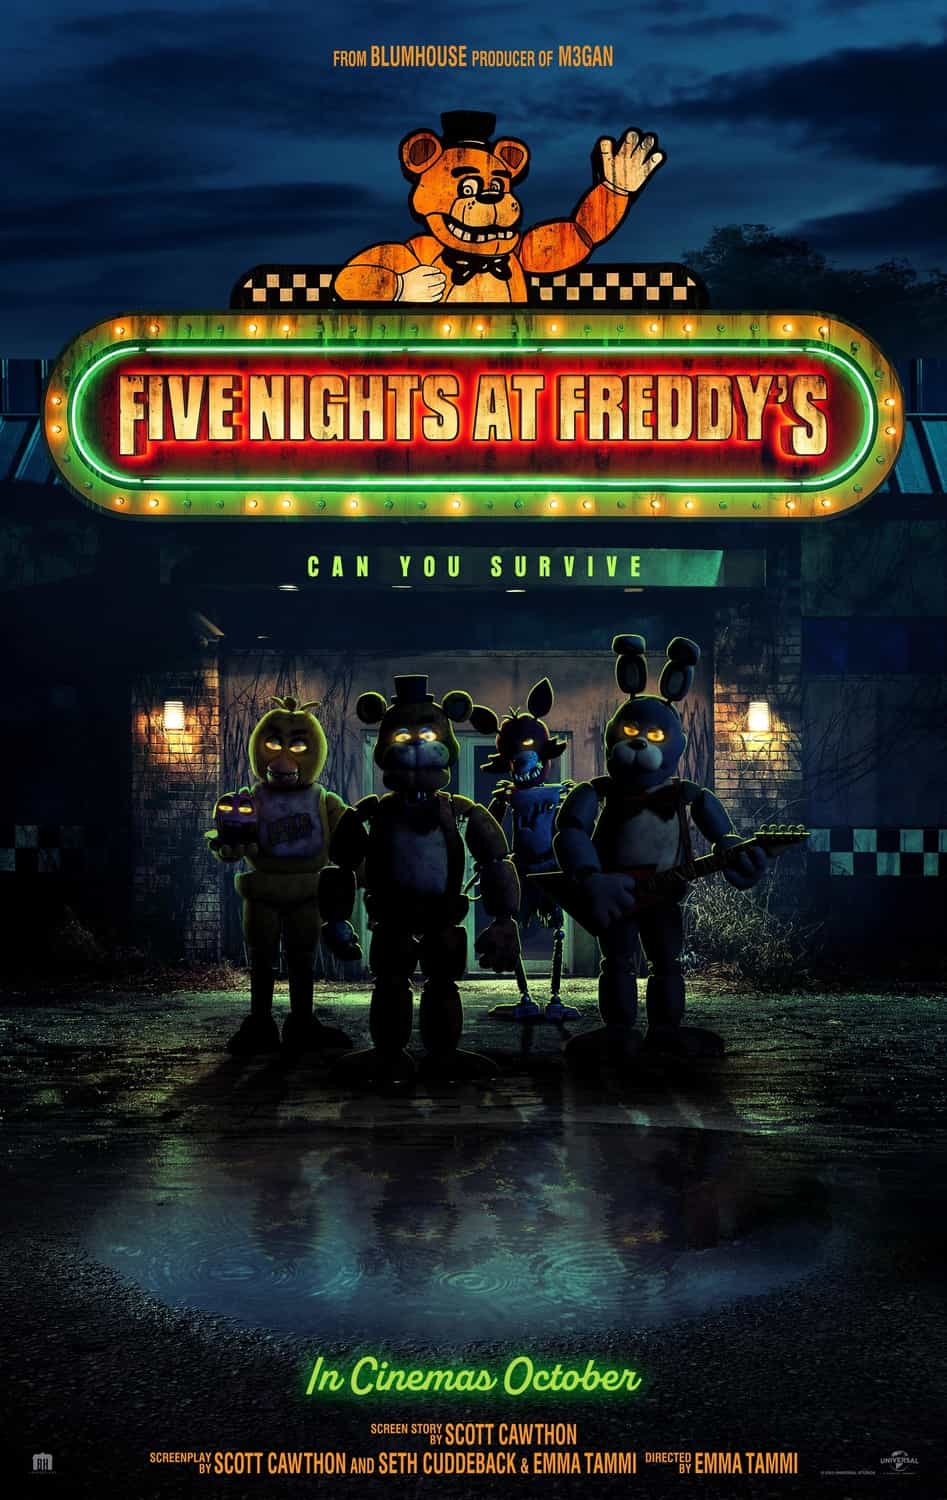 Five Nights at Freddys is given a 15 age rating in the UK for strong threat, violence